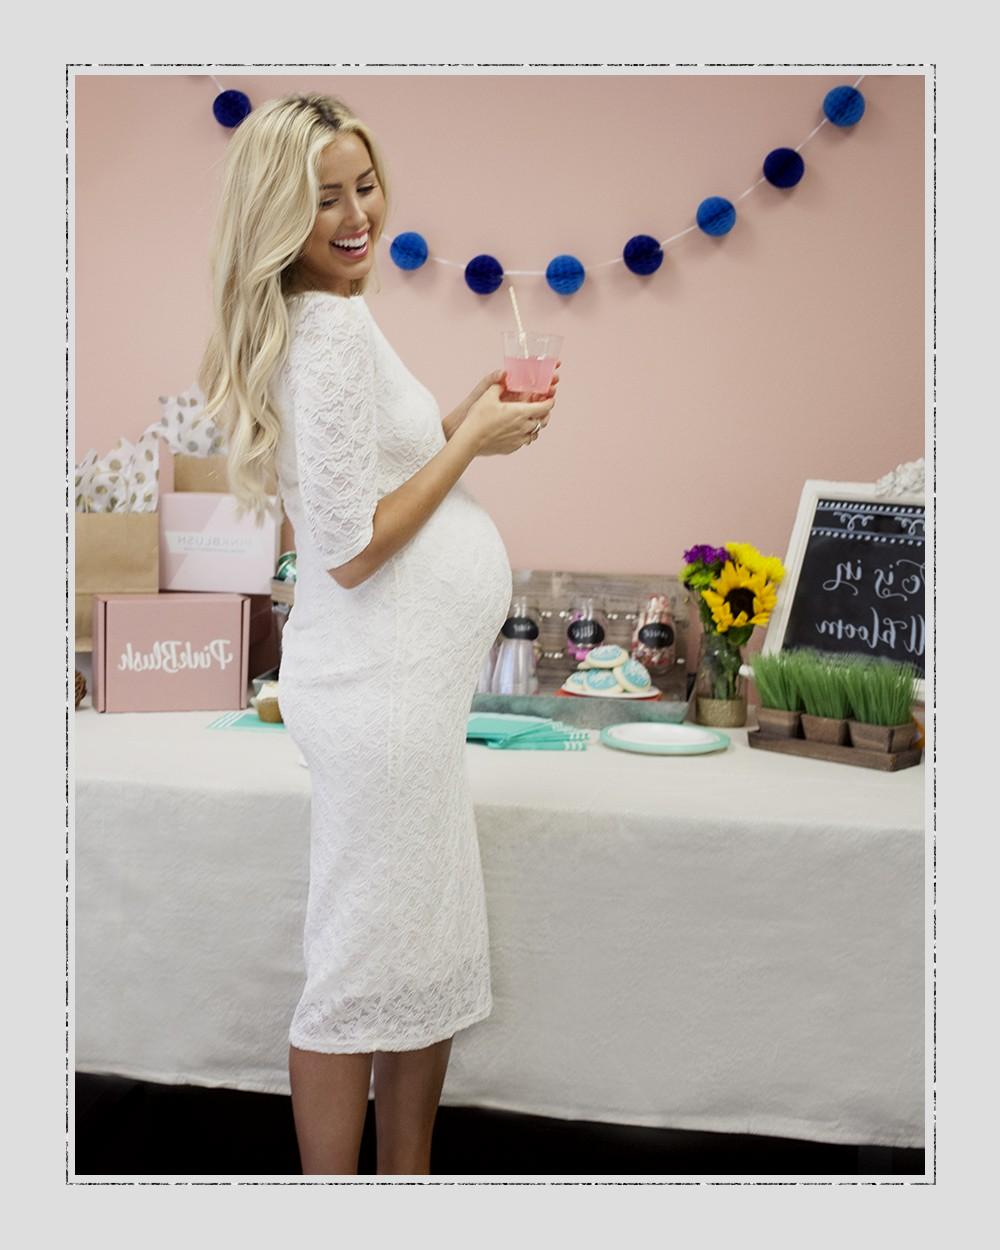 Full Size of Baby Shower:what Should I Wear To My Baby Shower Cute Baby Shower Outfits For Mom Stylish Maternity Dresses For Baby Shower Maternity Clothes Target Cute Baby Shower Outfits For Mom Maternity Maxi Dresses Maternity Dresses Maternity Gown Style